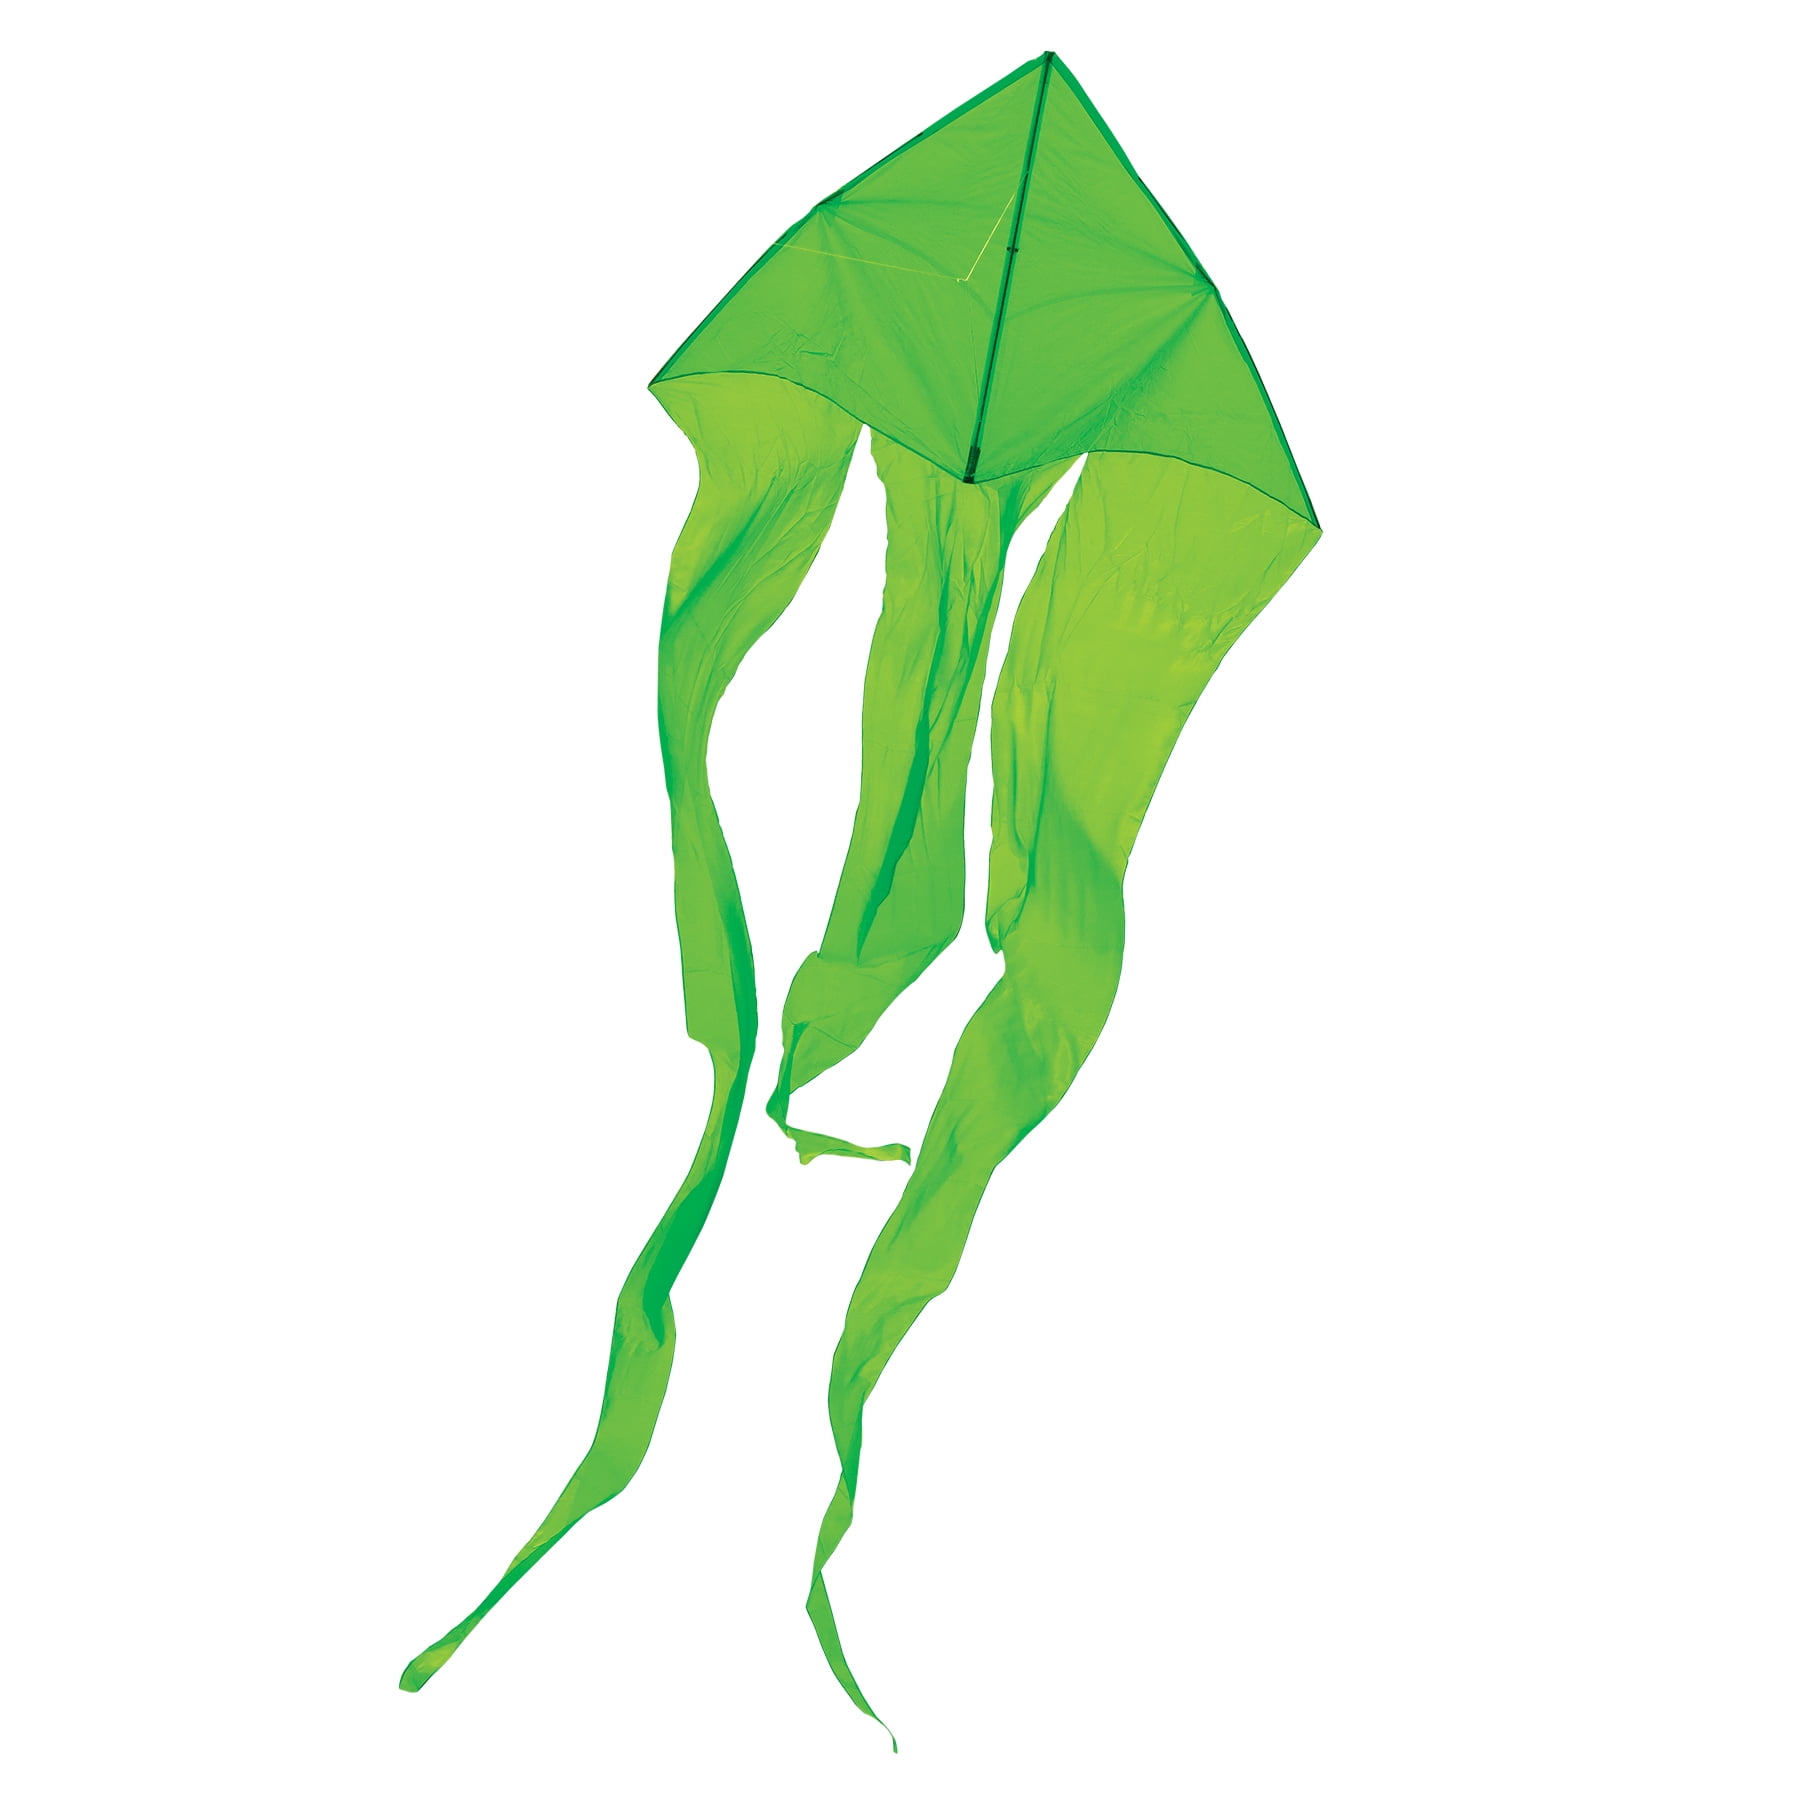 In the Breeze 3226 — Green 77-inch Wave Delta - Single Line Kite - Kite  Line and Bag Included - Combination of Ripstop and Taffeta Fabric